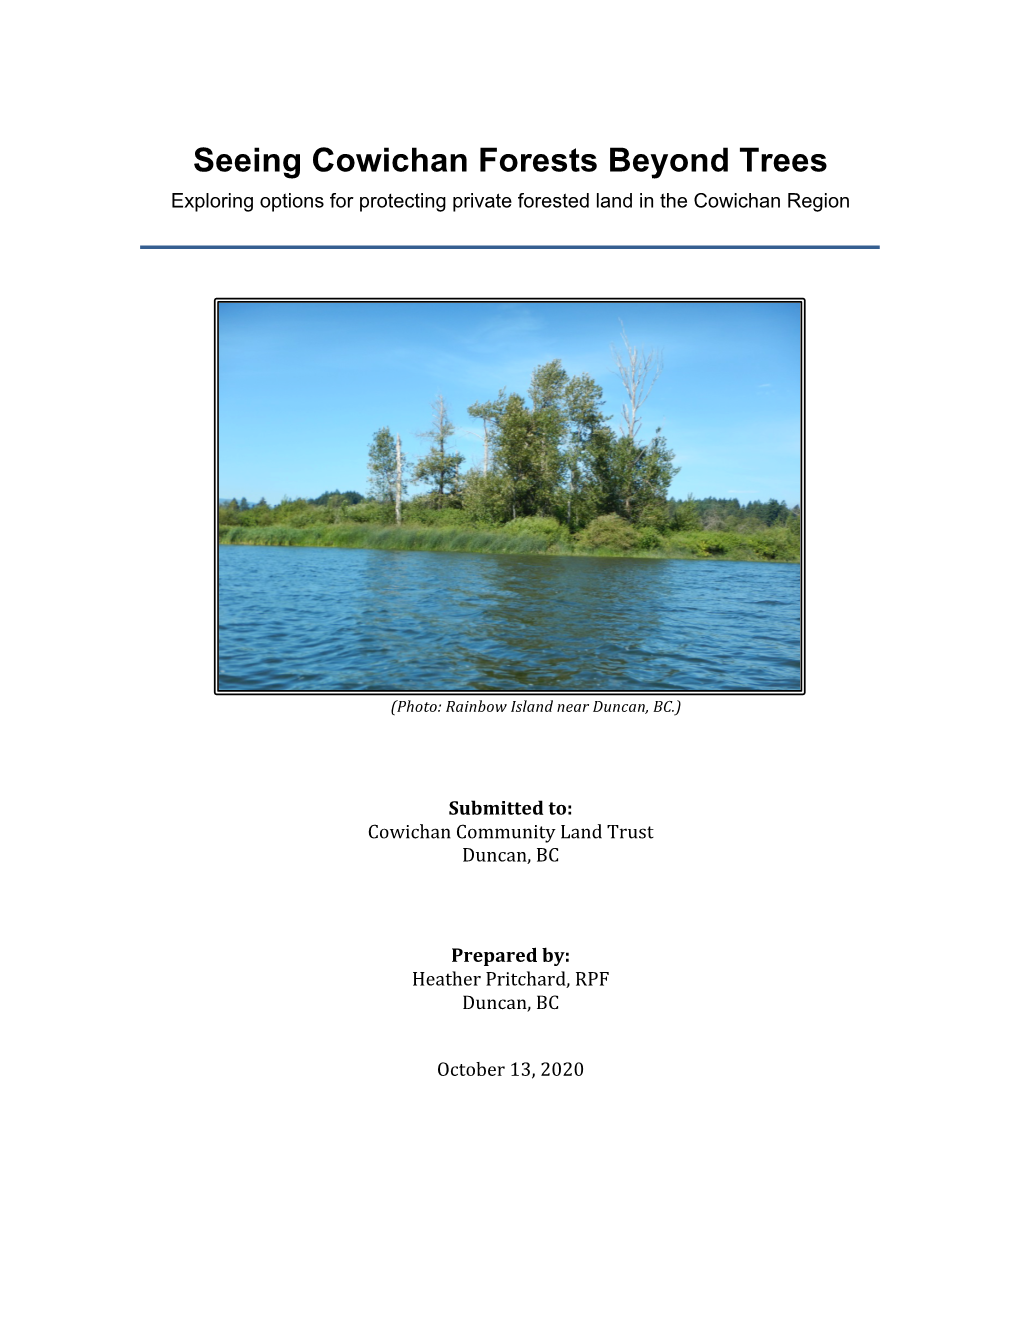 Seeing Cowichan Forests Beyond Trees Exploring Options for Protecting Private Forested Land in the Cowichan Region